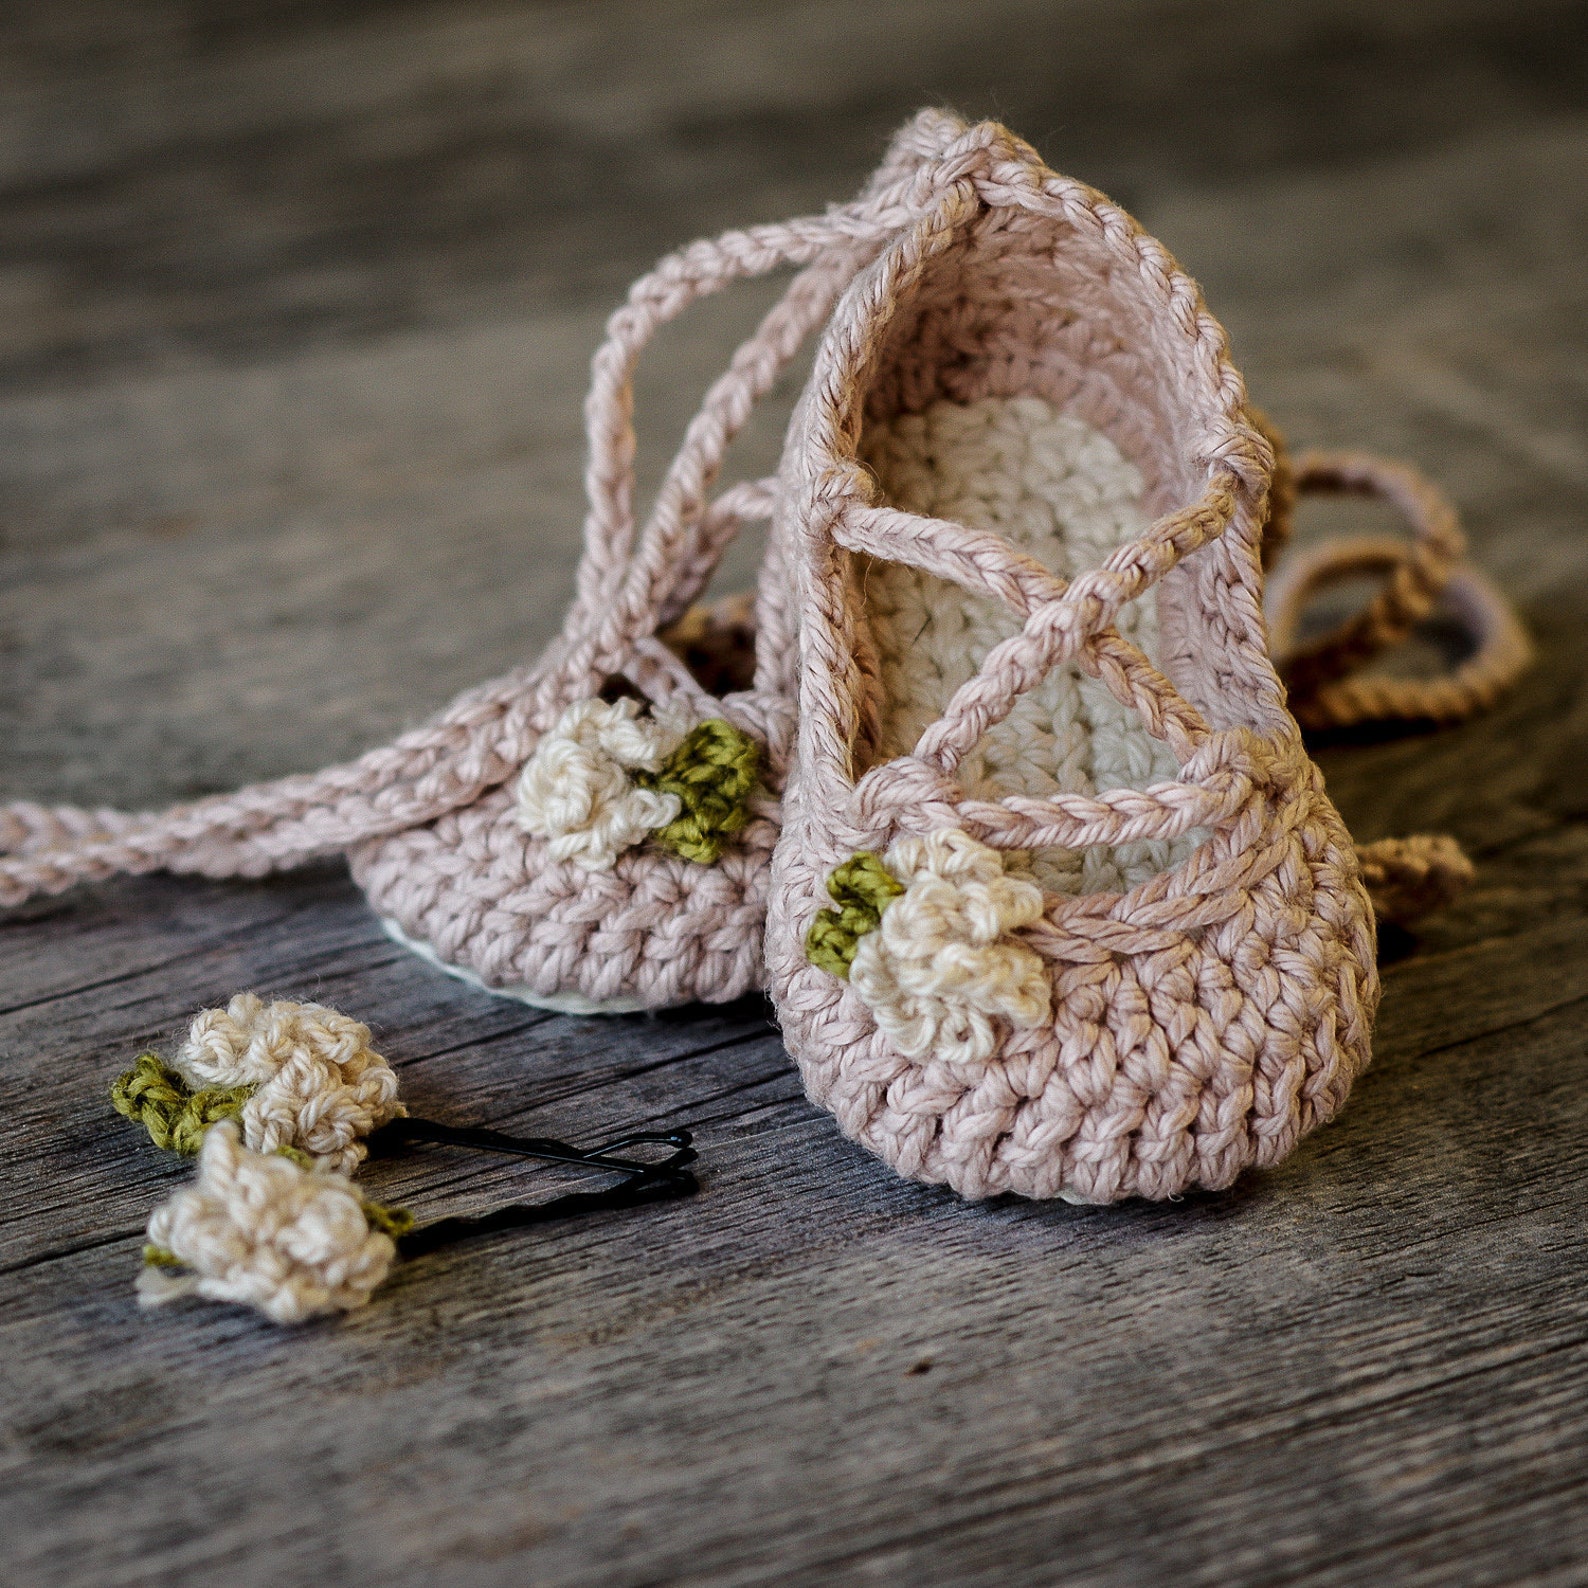 crochet pattern - strappy ballet flats - 3 variations included - baby - newborn, 3-6 and 6-12 months, instant download kc550